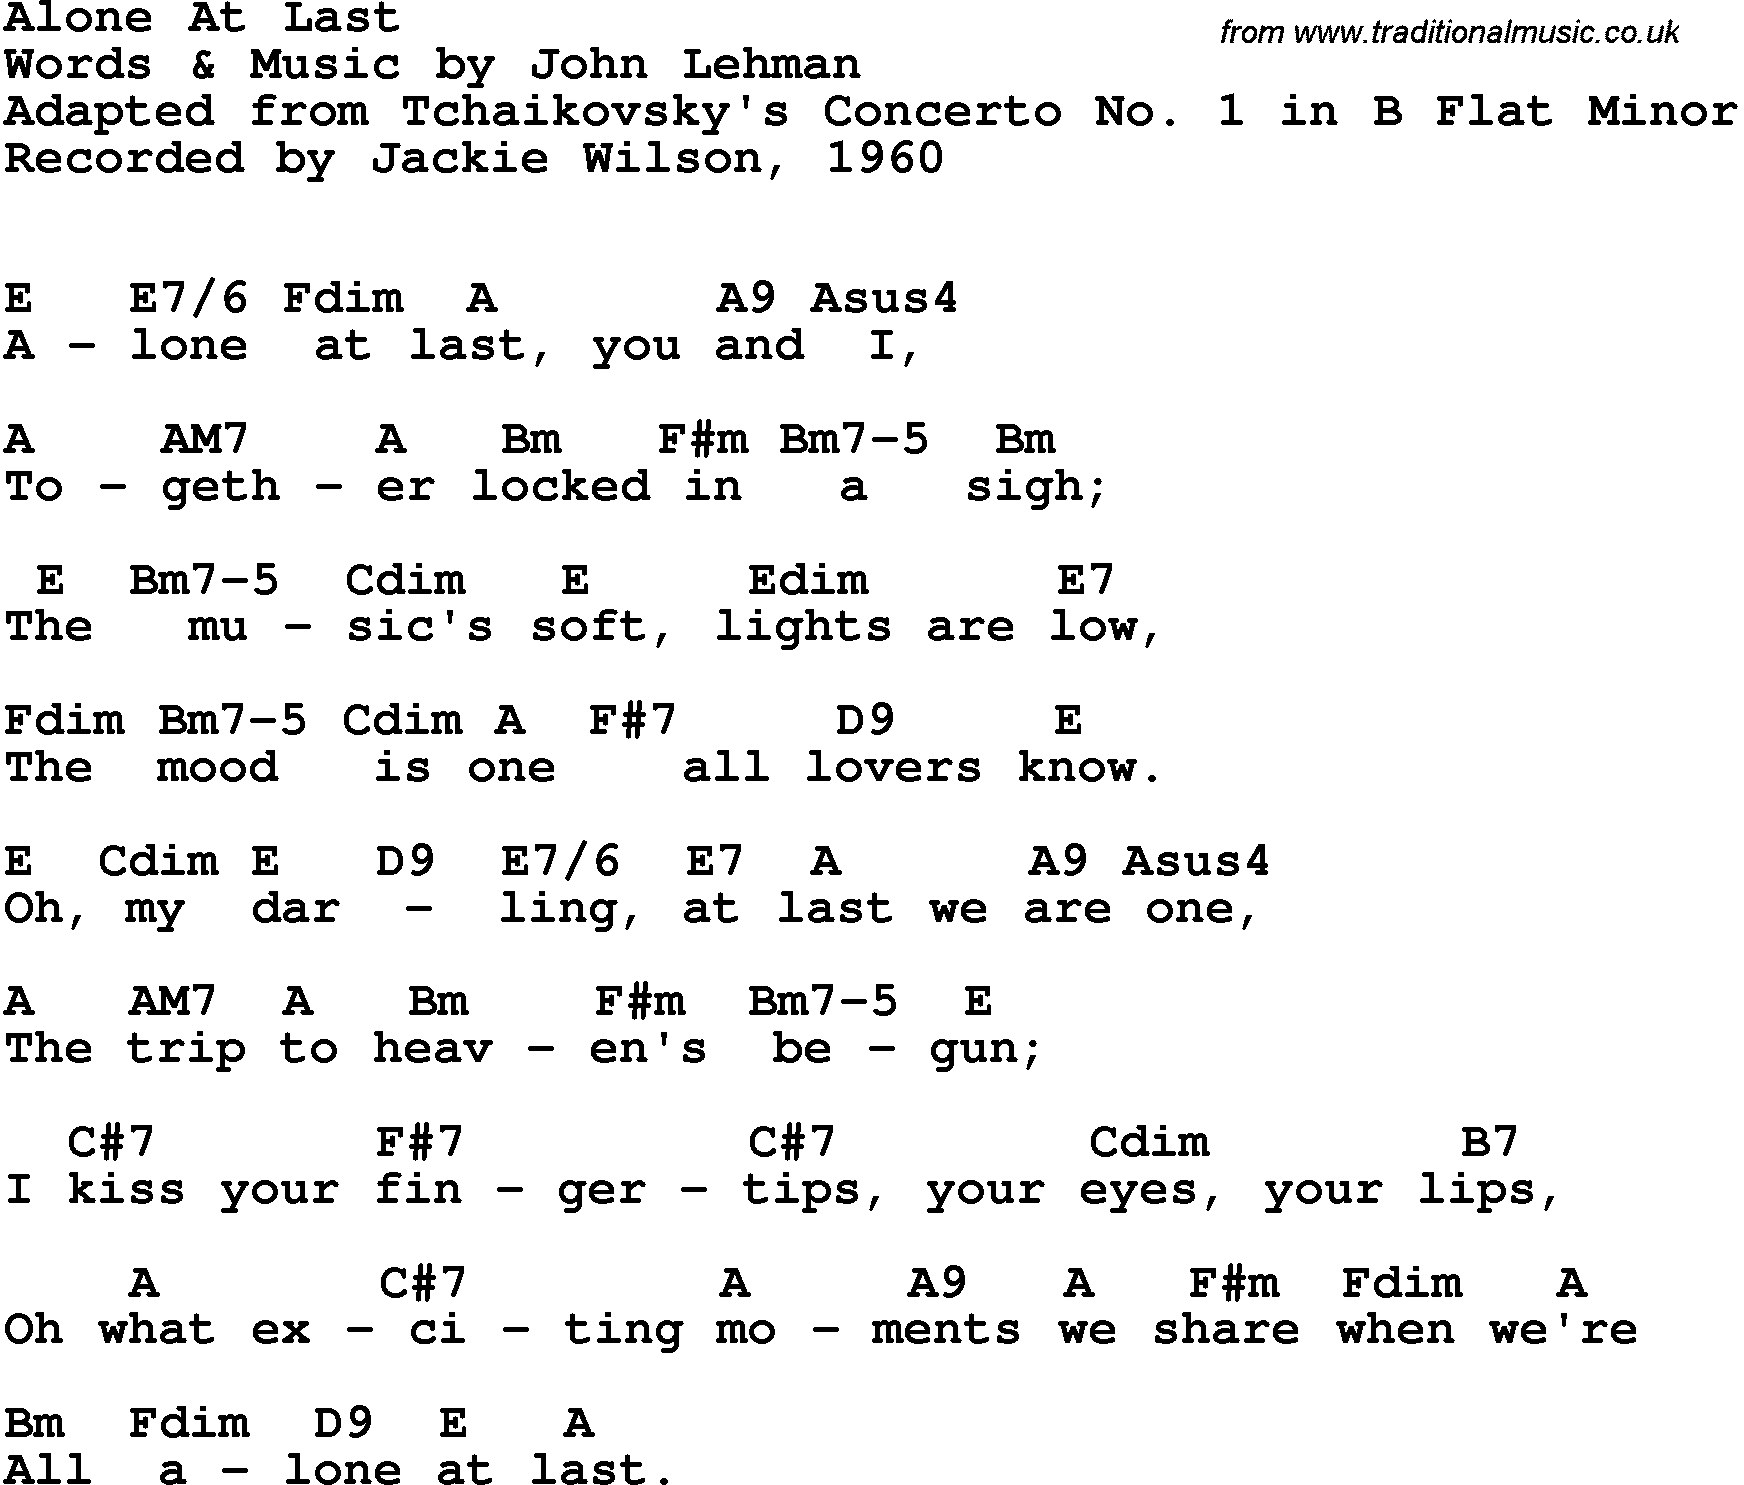 Song Lyrics with guitar chords for Alone At Last - Jackie Wilson, 1960